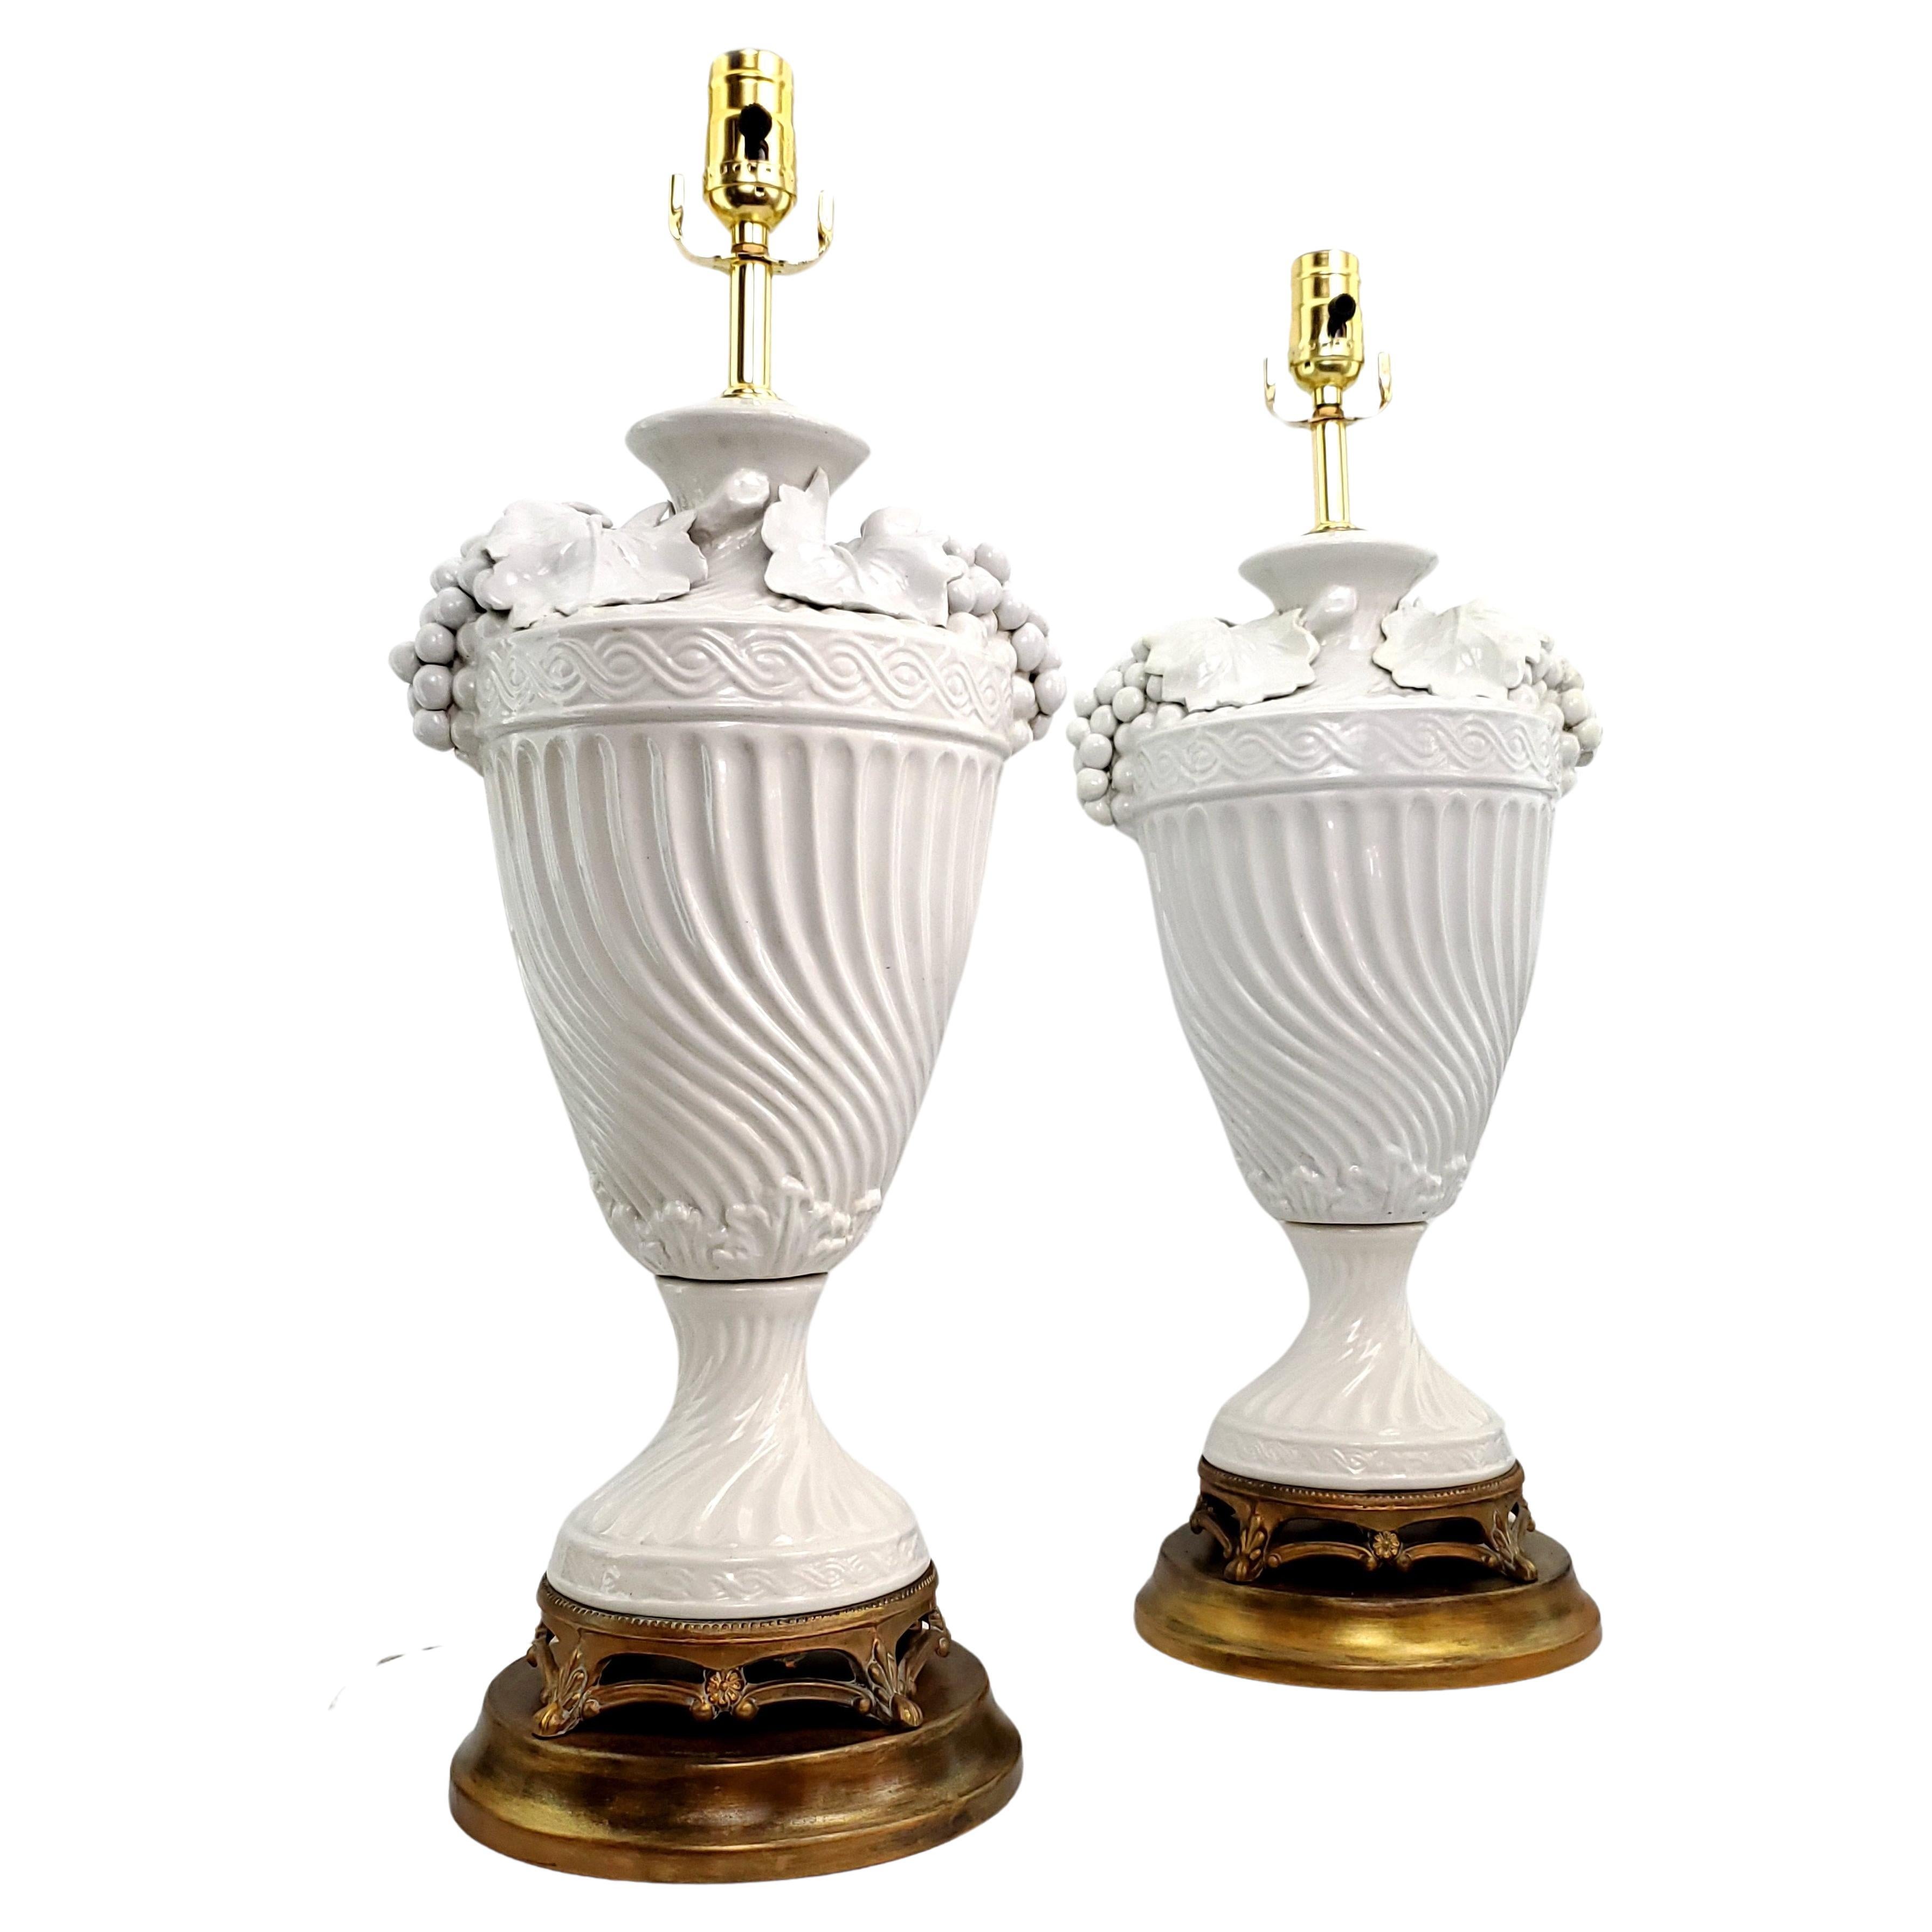 Pair of vintage Italian white Blanc de Chine porcelain table lamps, circa 1950. Both of these large lamps were disassembled, cleaned, and professionally restored.  The metal bases are original to the lamp and were freshened up with a gold metallic